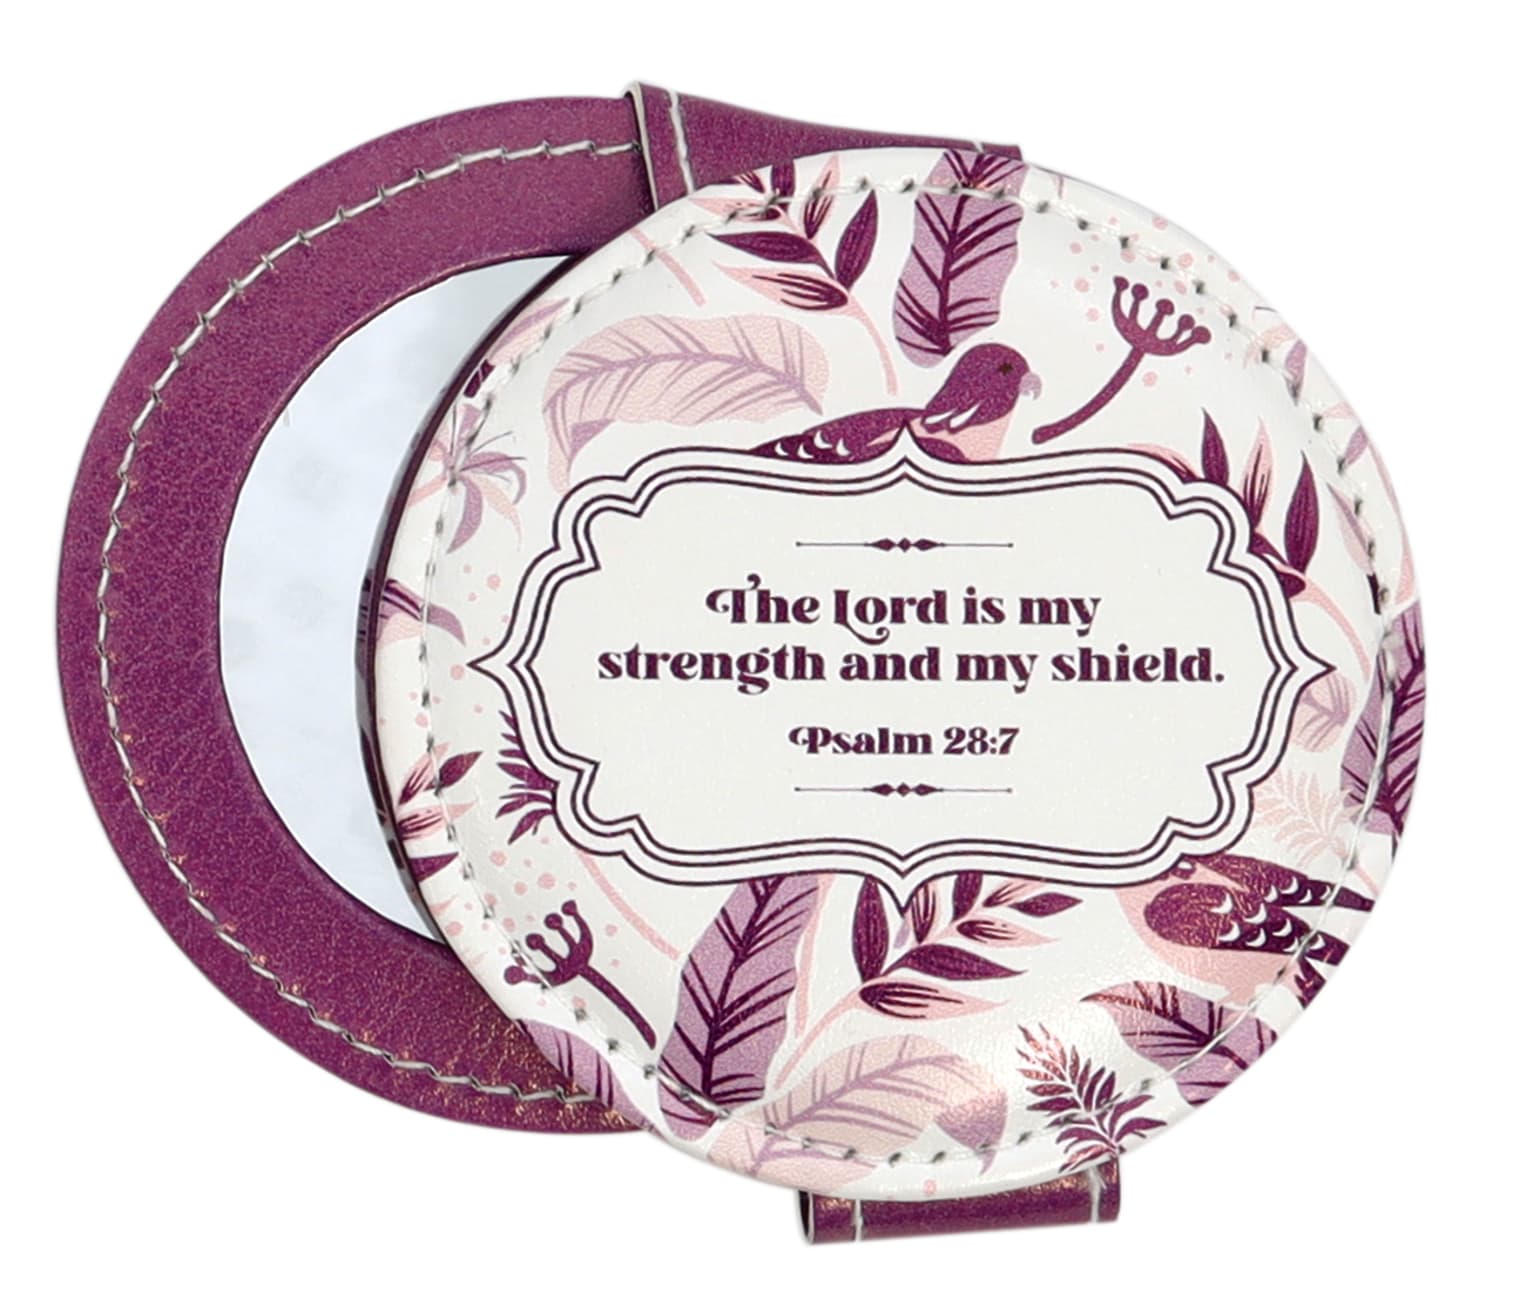 Compact Mirror: The Lord is My Strength and My Shield, Psalm 28:7 Homeware